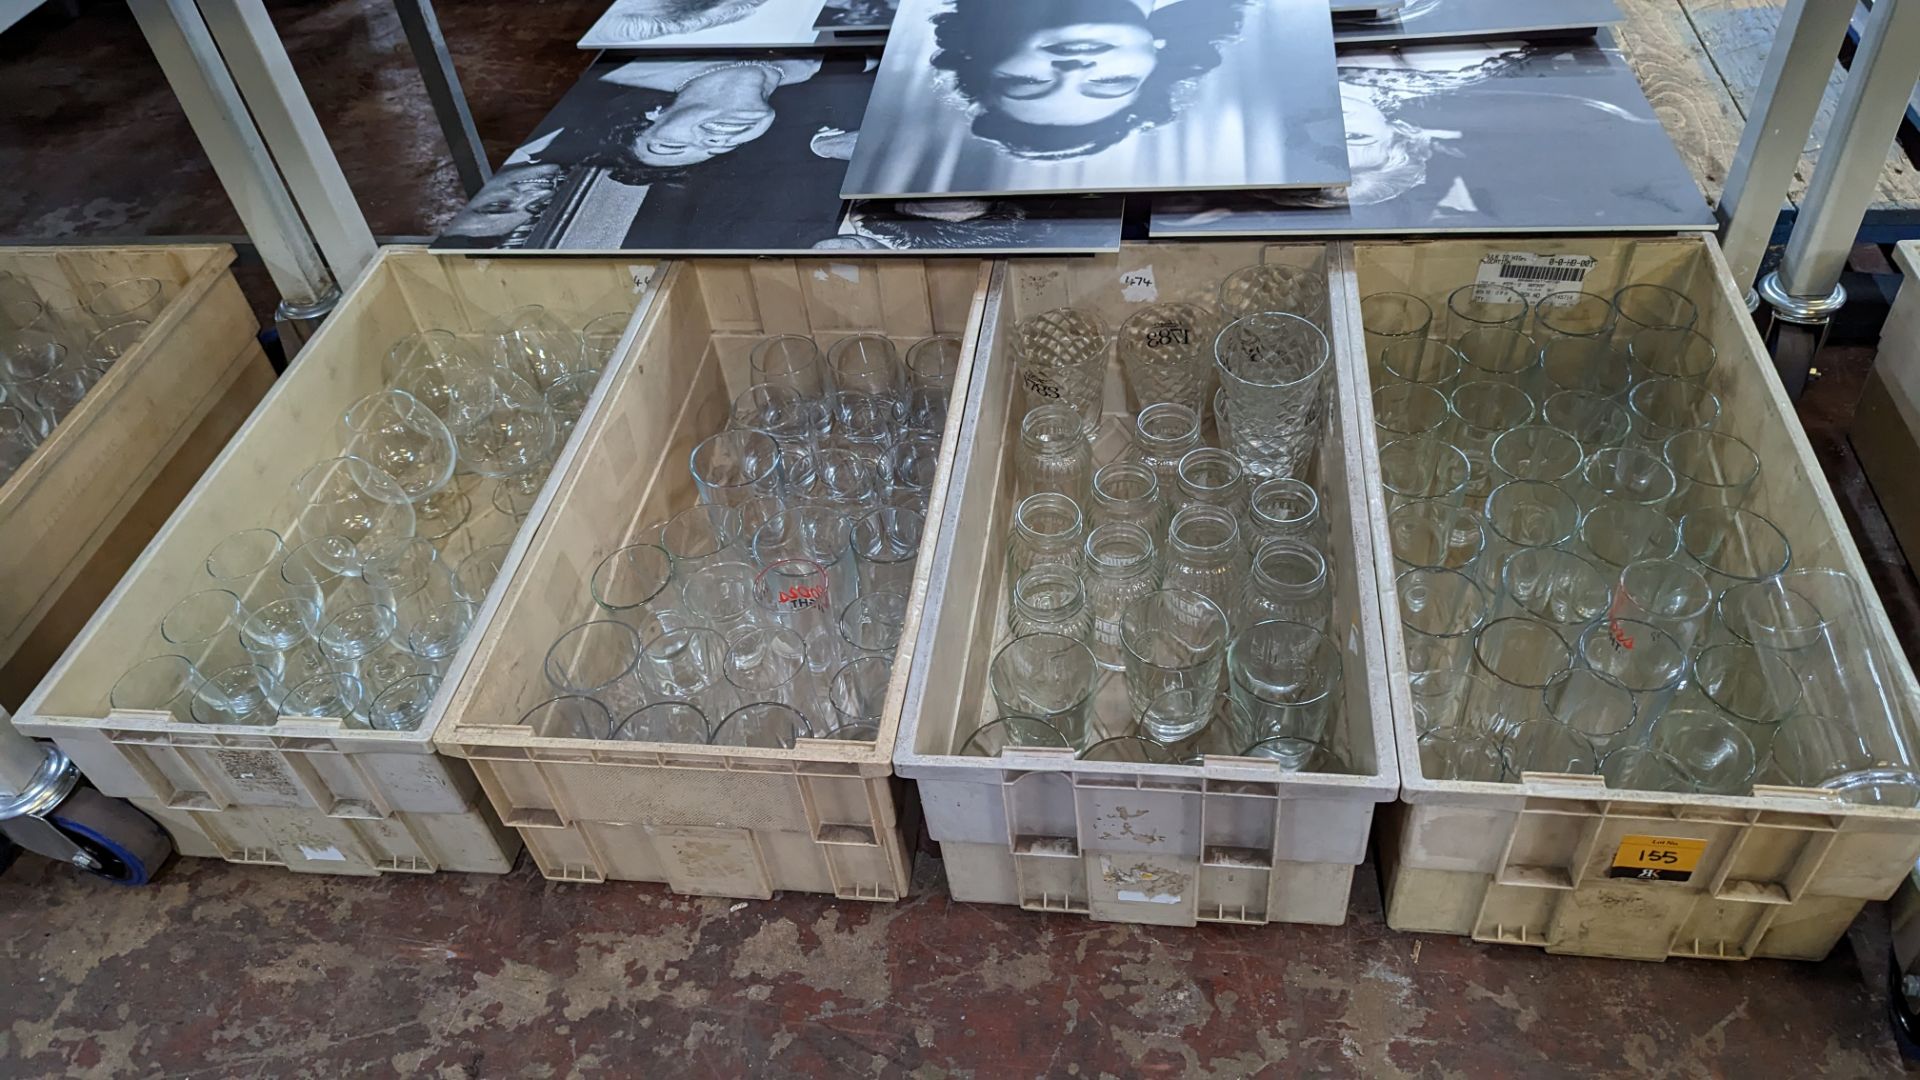 The contents of 4 crates of assorted tumblers, jars, brandy snifters, wine glasses and other glasswa